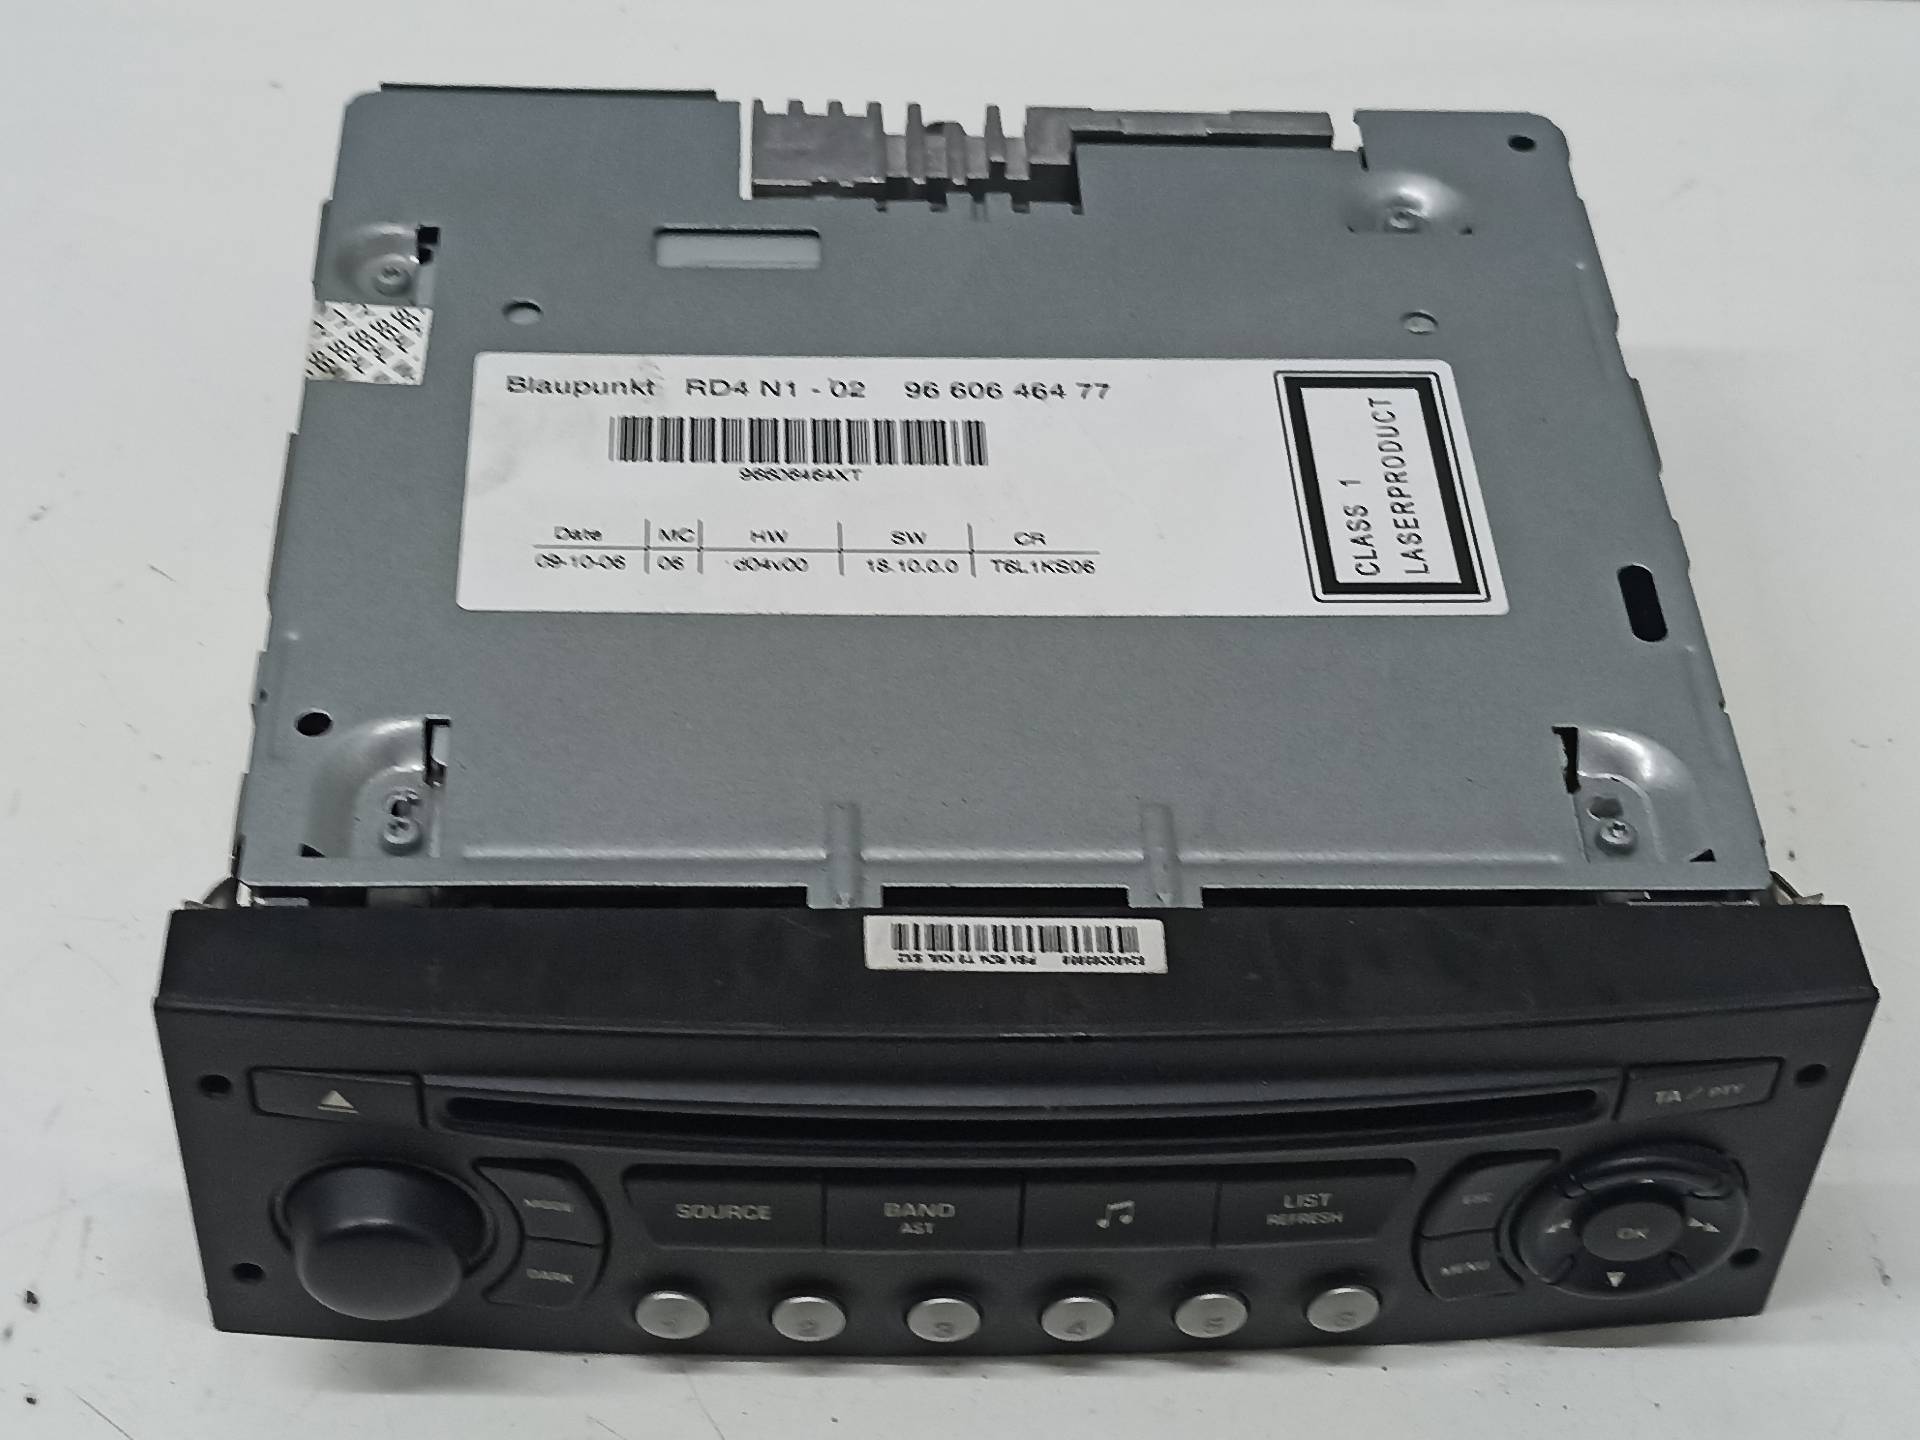 PEUGEOT 307 1 generation (2001-2008) Music Player Without GPS 9660646477, 326554810223, 223 24315281